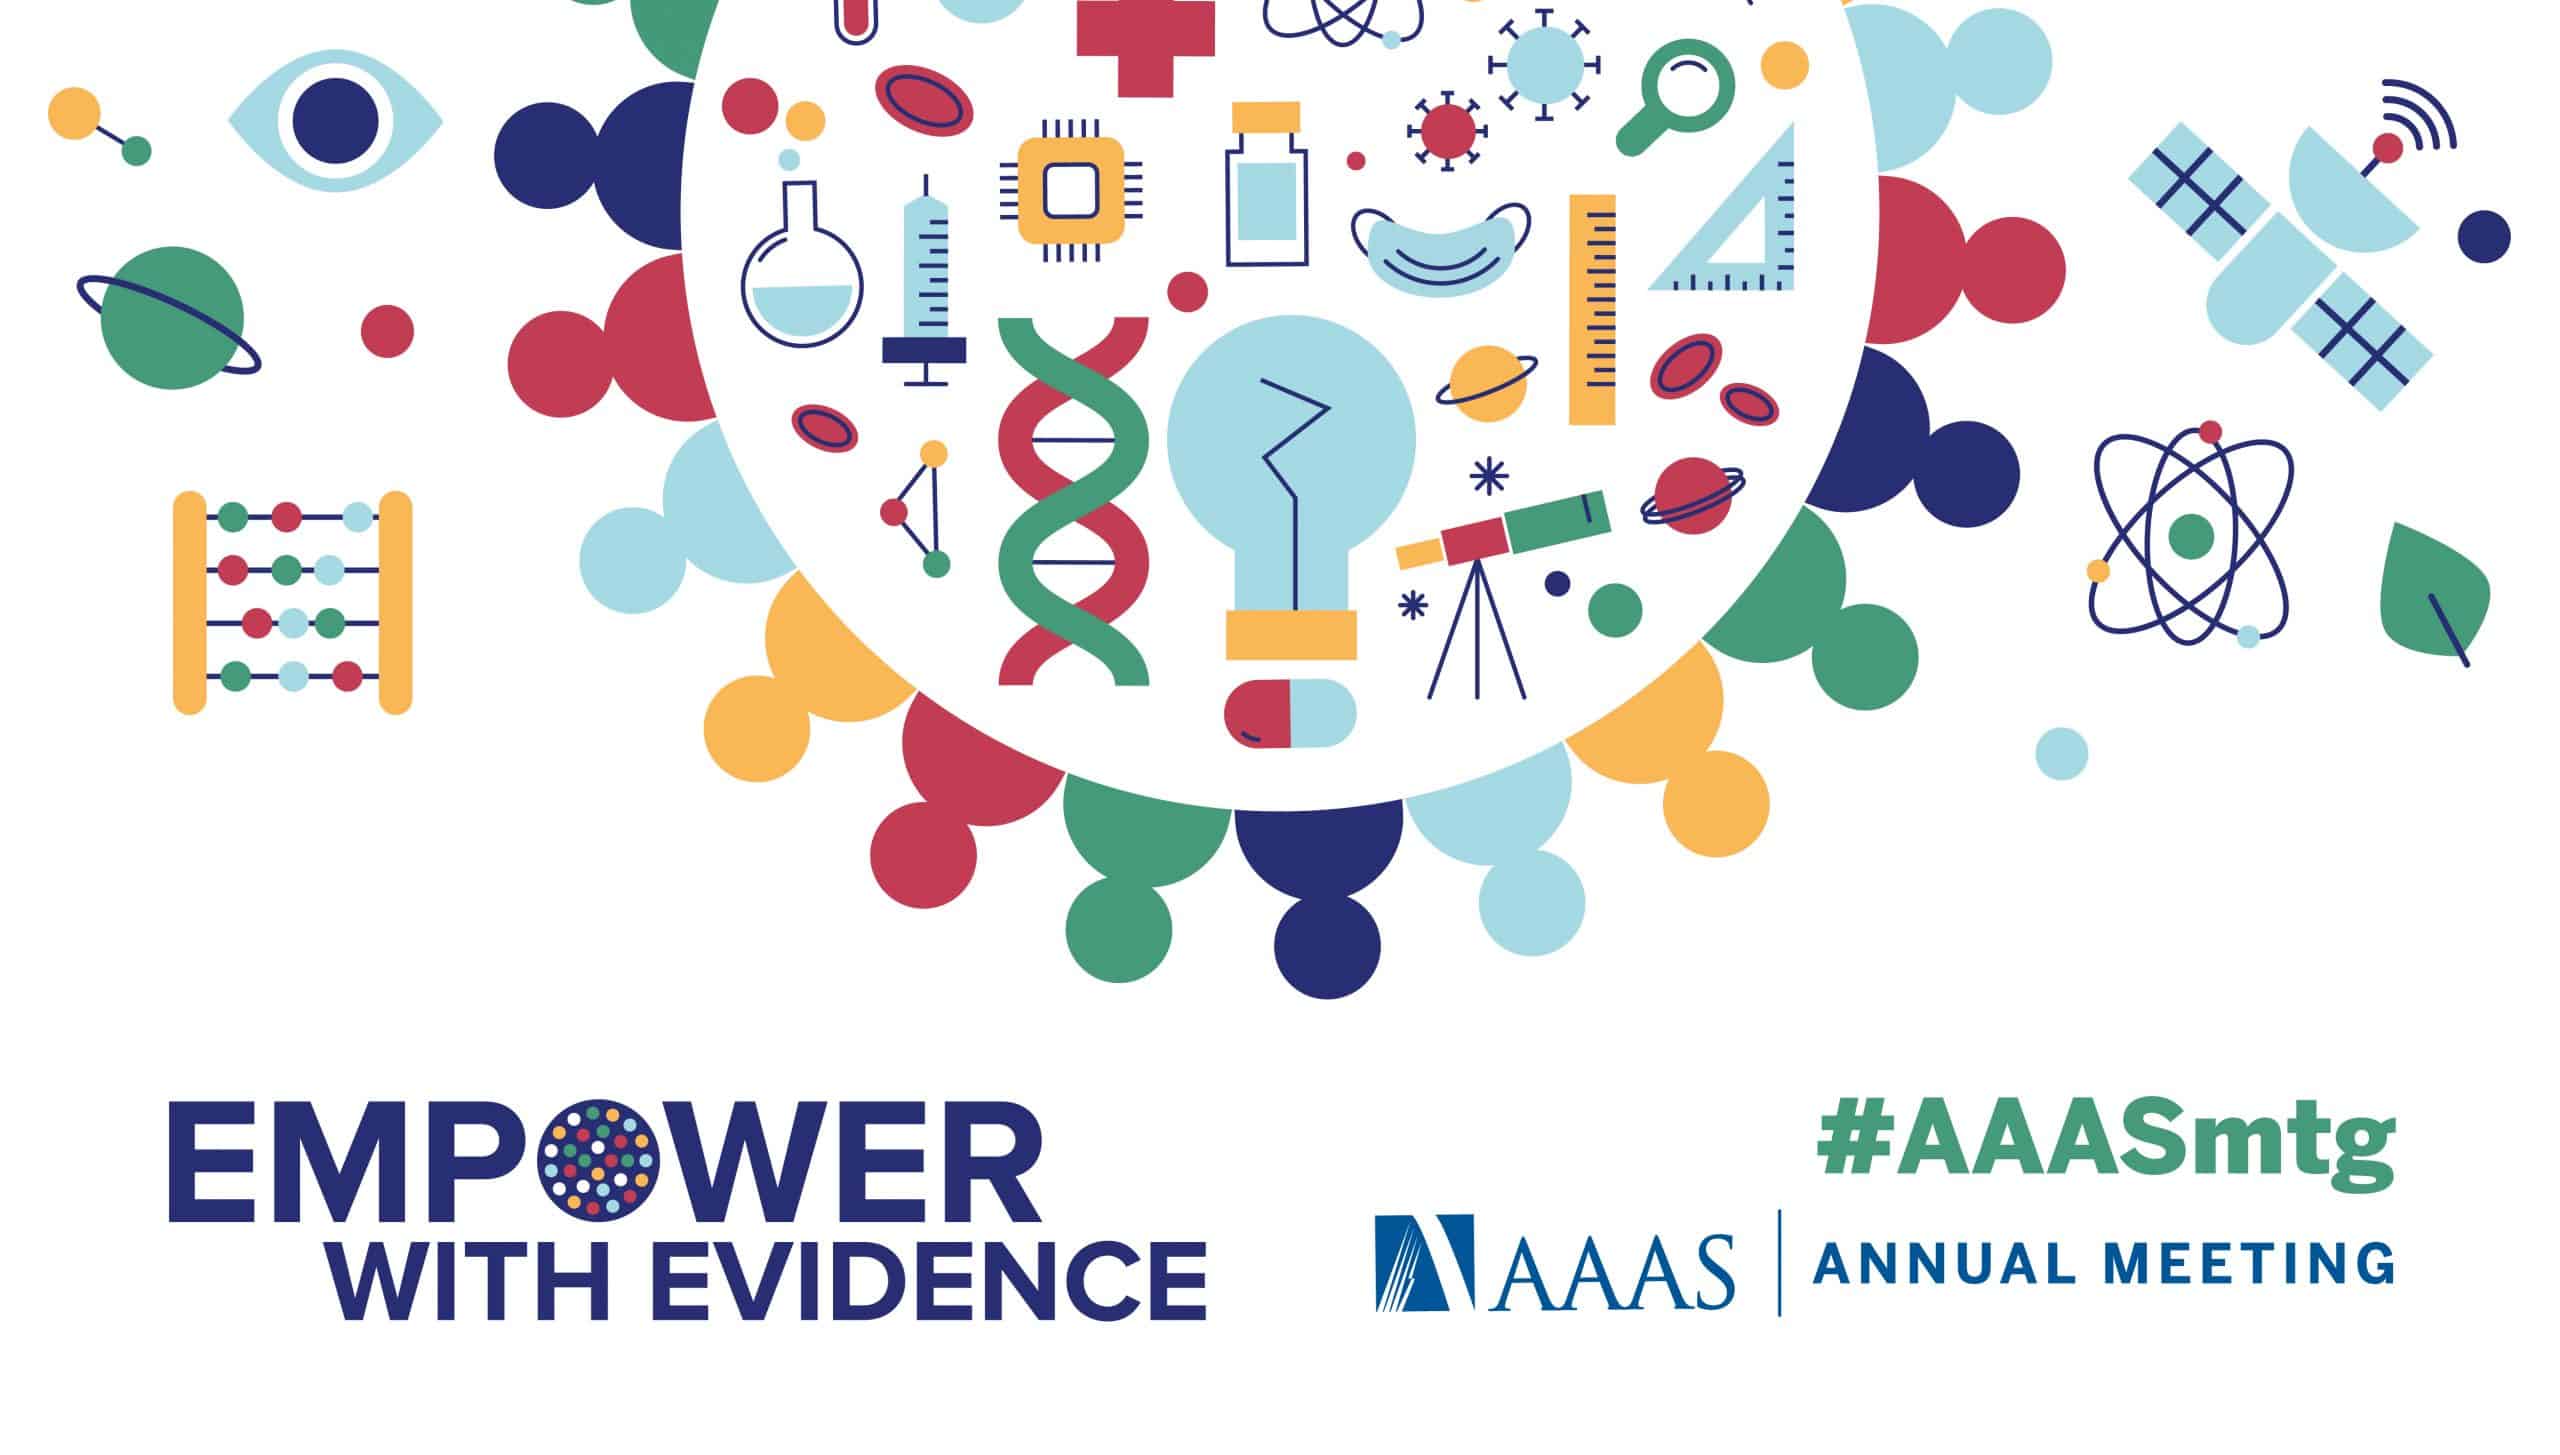 AAAS graphic with headline Empower with Evidence hashtag A A A S m t g. Illustration shows various scientific motifs encircled by the outline of a cell wall or virus casing with protein spikes.